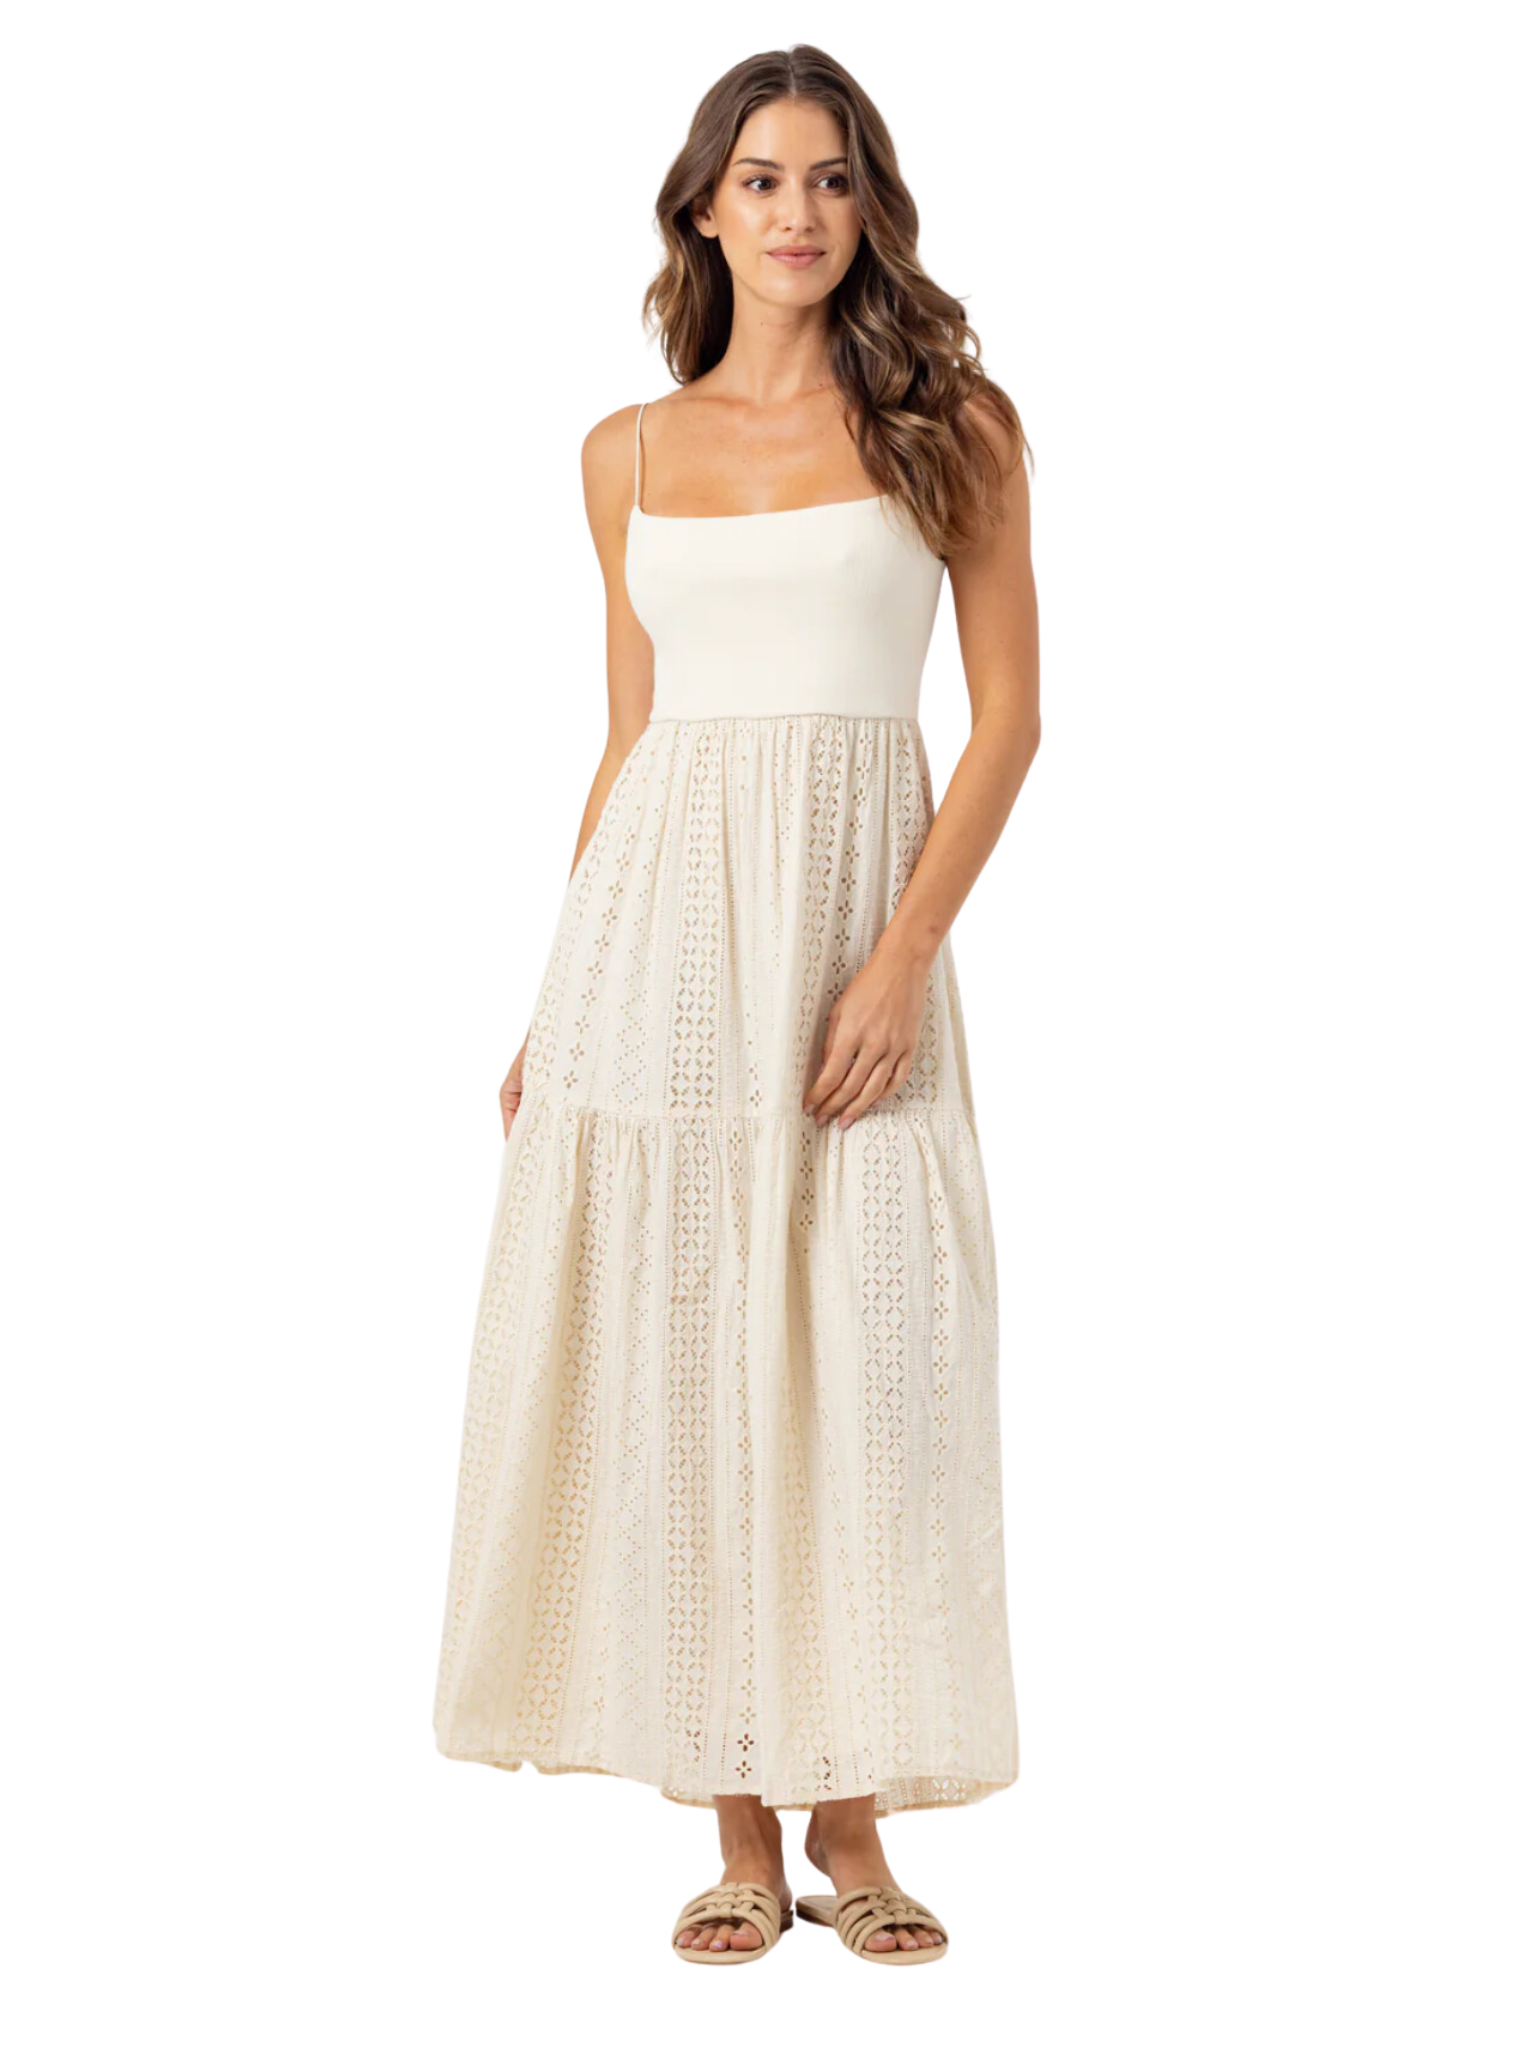 The Rose Dress by Sundays is perfectly effortless. Featuring a stretchy, soft rib fabric bodice with adjustable straps, the skirt is made from a delicate cotton eyelet. The elastic on the back provides the perfect fit that molds to your body. Embrace comfort and style this spring in this elevated maxi dress. A full-length dress that finishes just at your ankles.